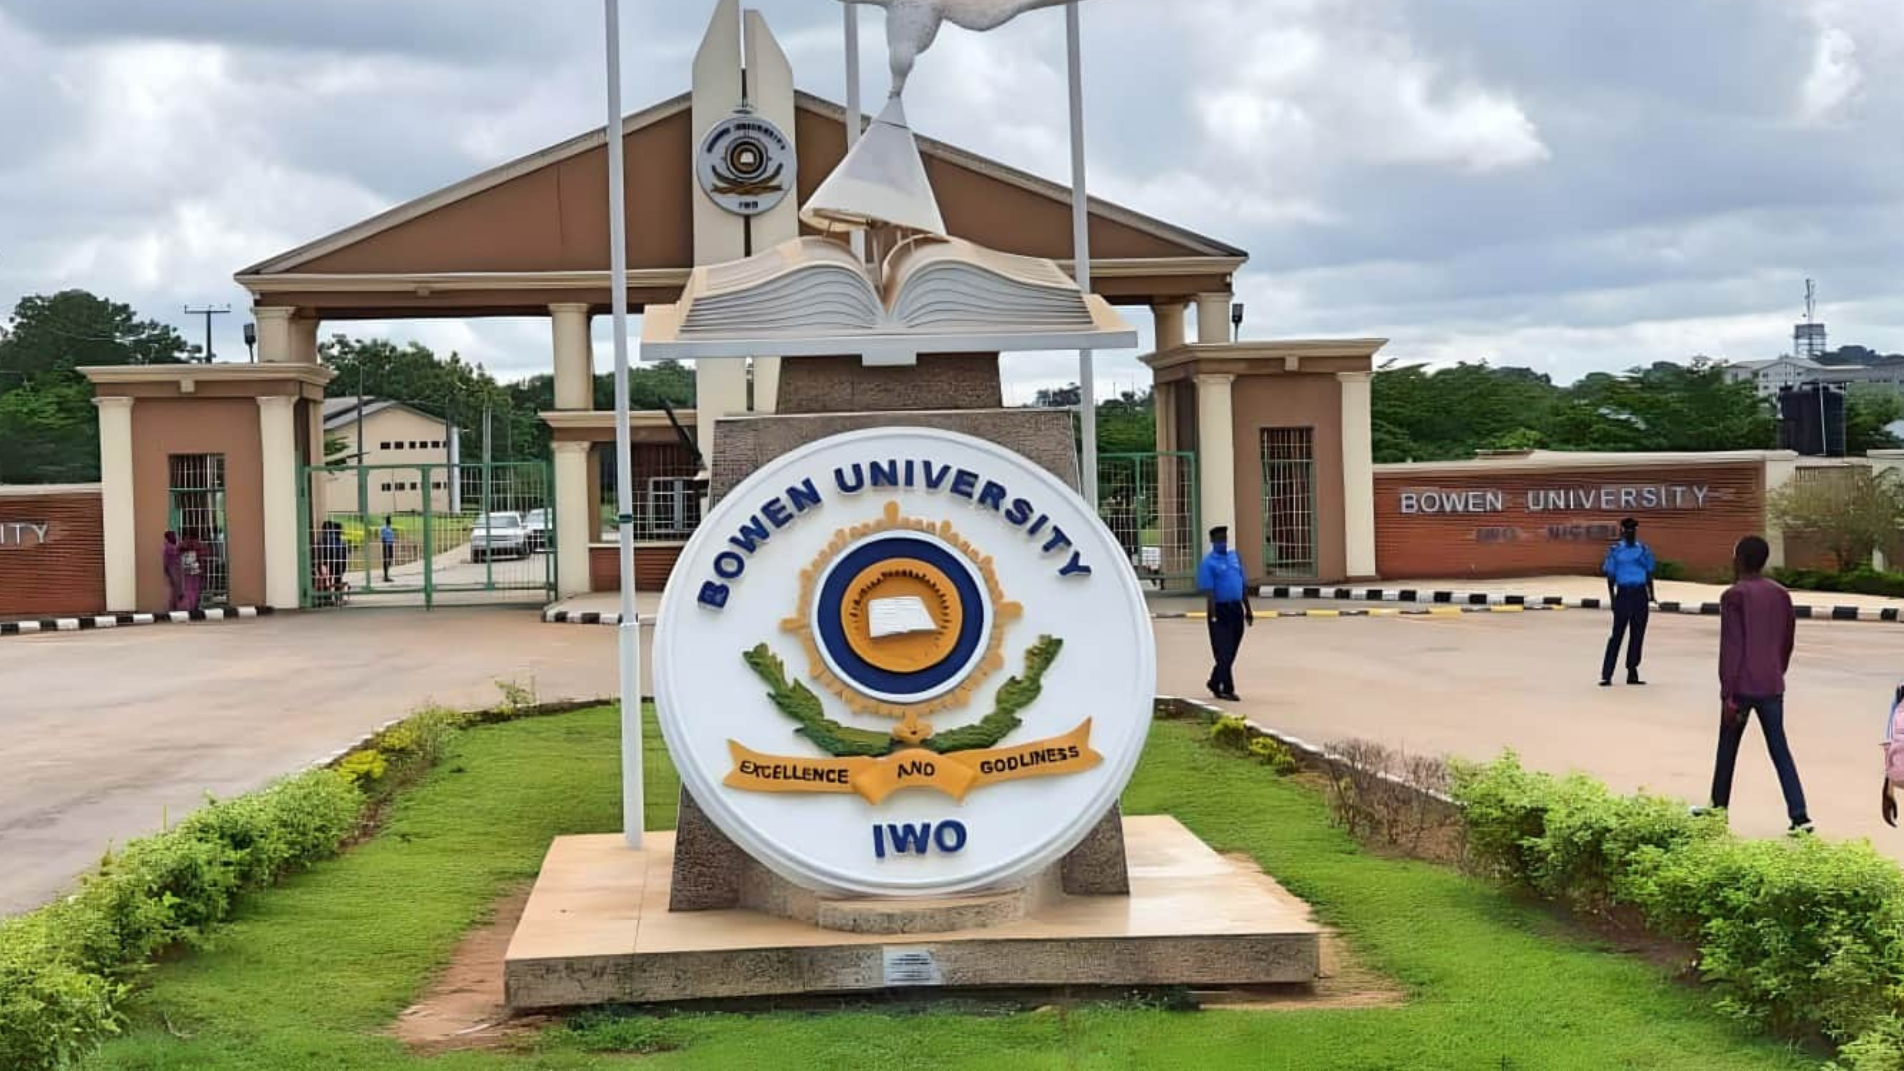 400 Level Student Emerges One-Day Vice Chancellor at Bowen University